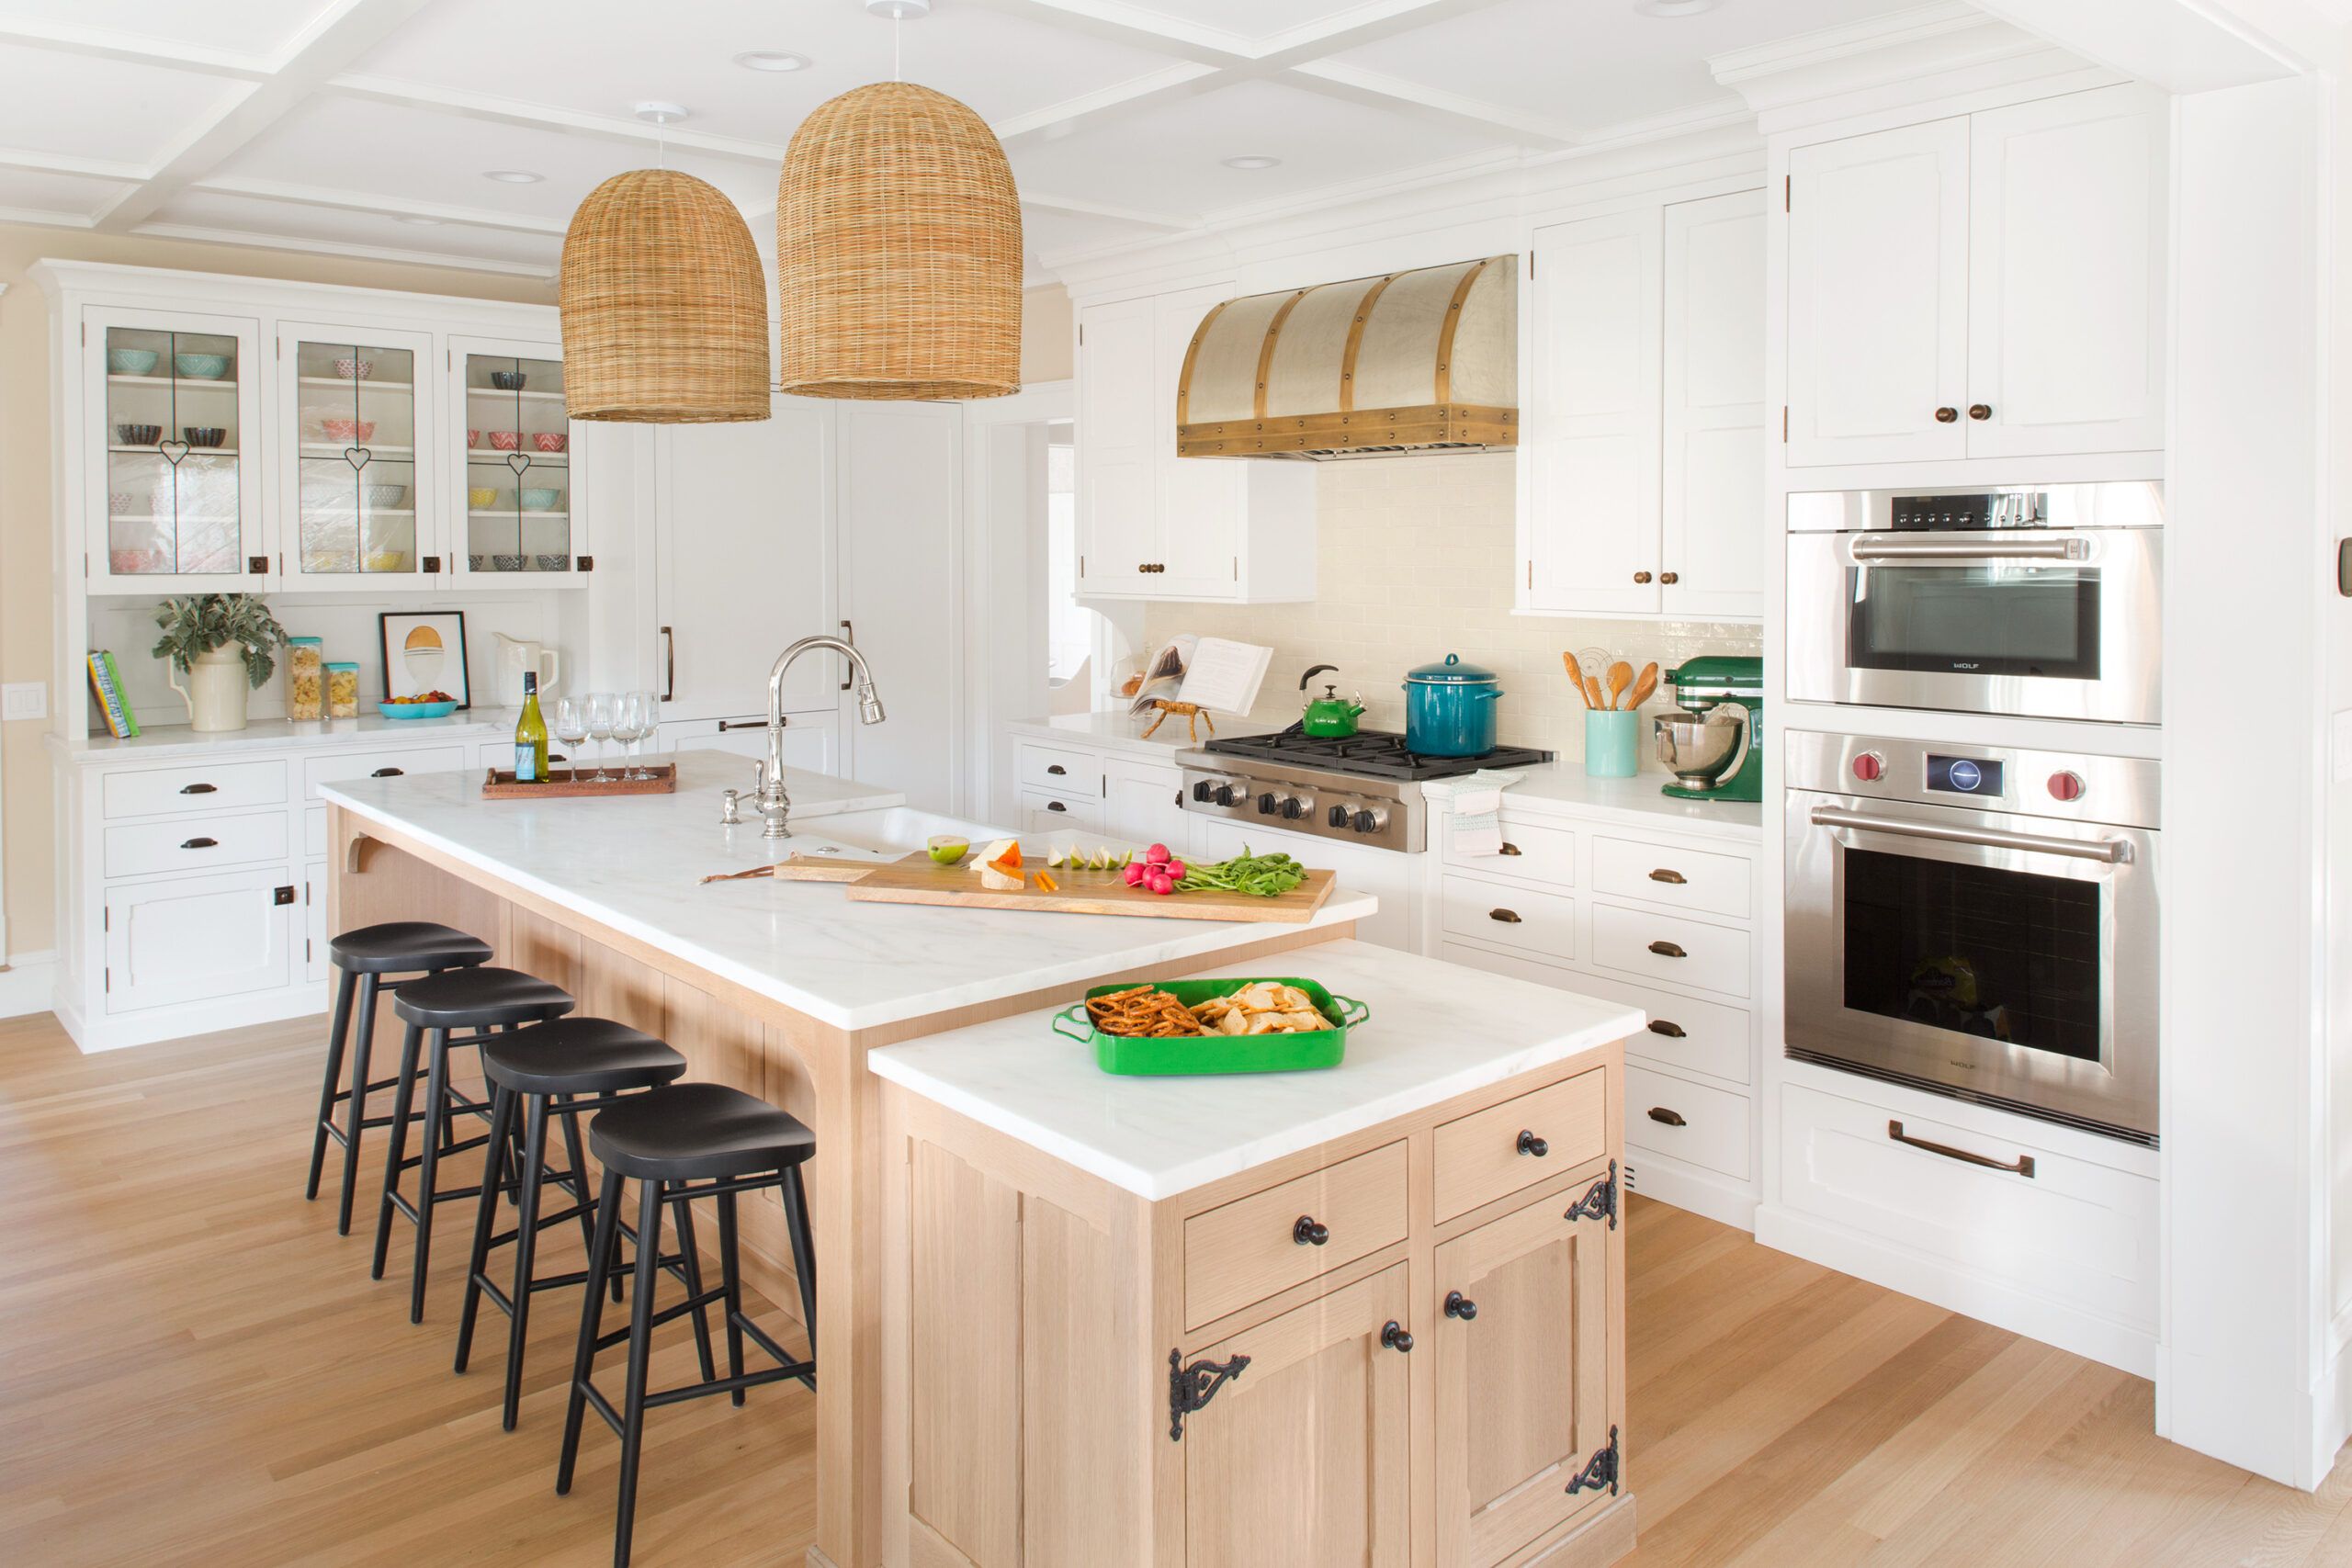 10 Kitchen Cabinet Accessories Worth Considering For Your Home